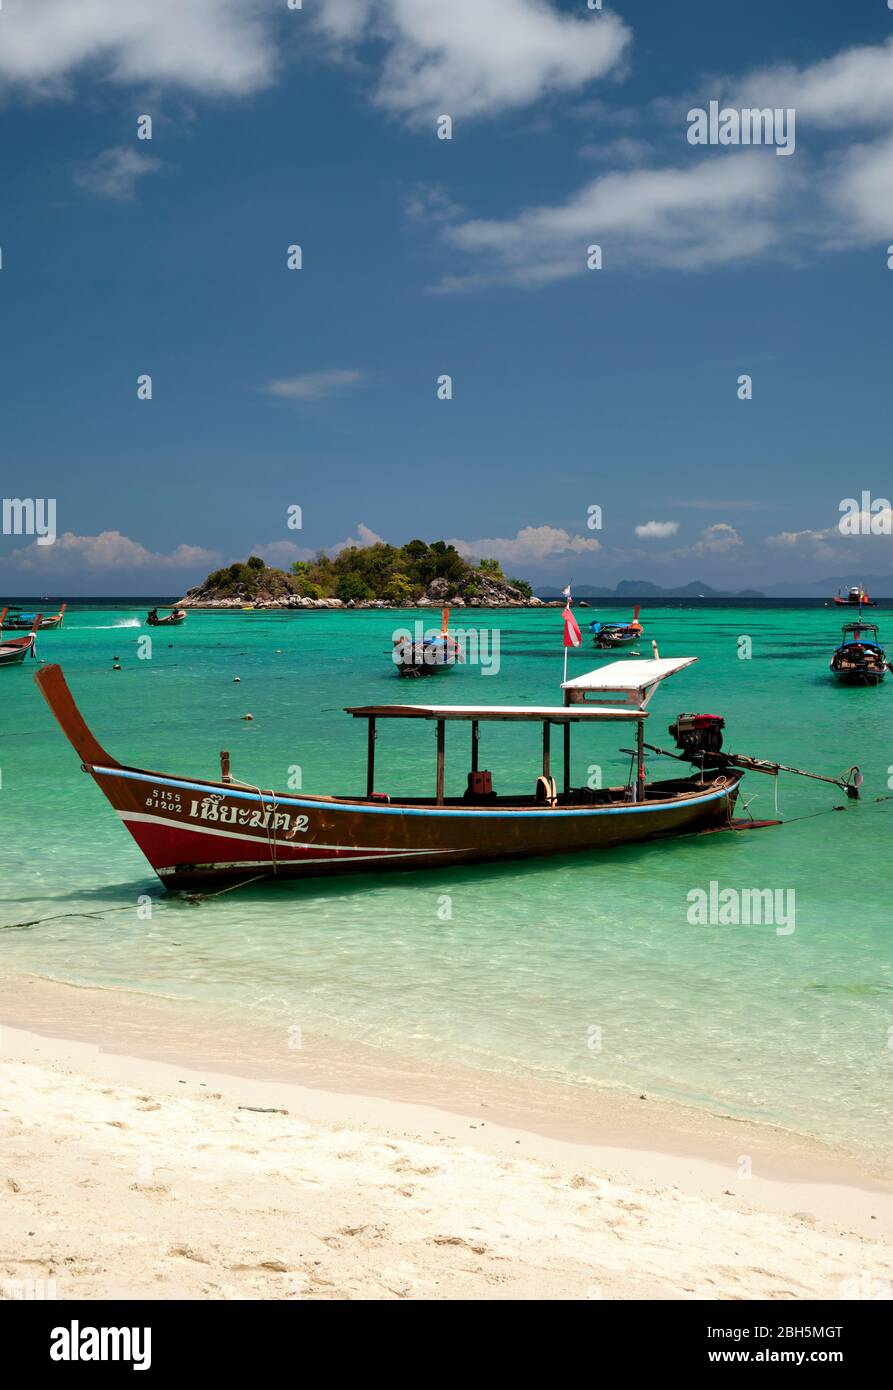 Taxi boat on sunrise beach thailand asia, with clear blue water and blue sky, vertical format Stock Photo